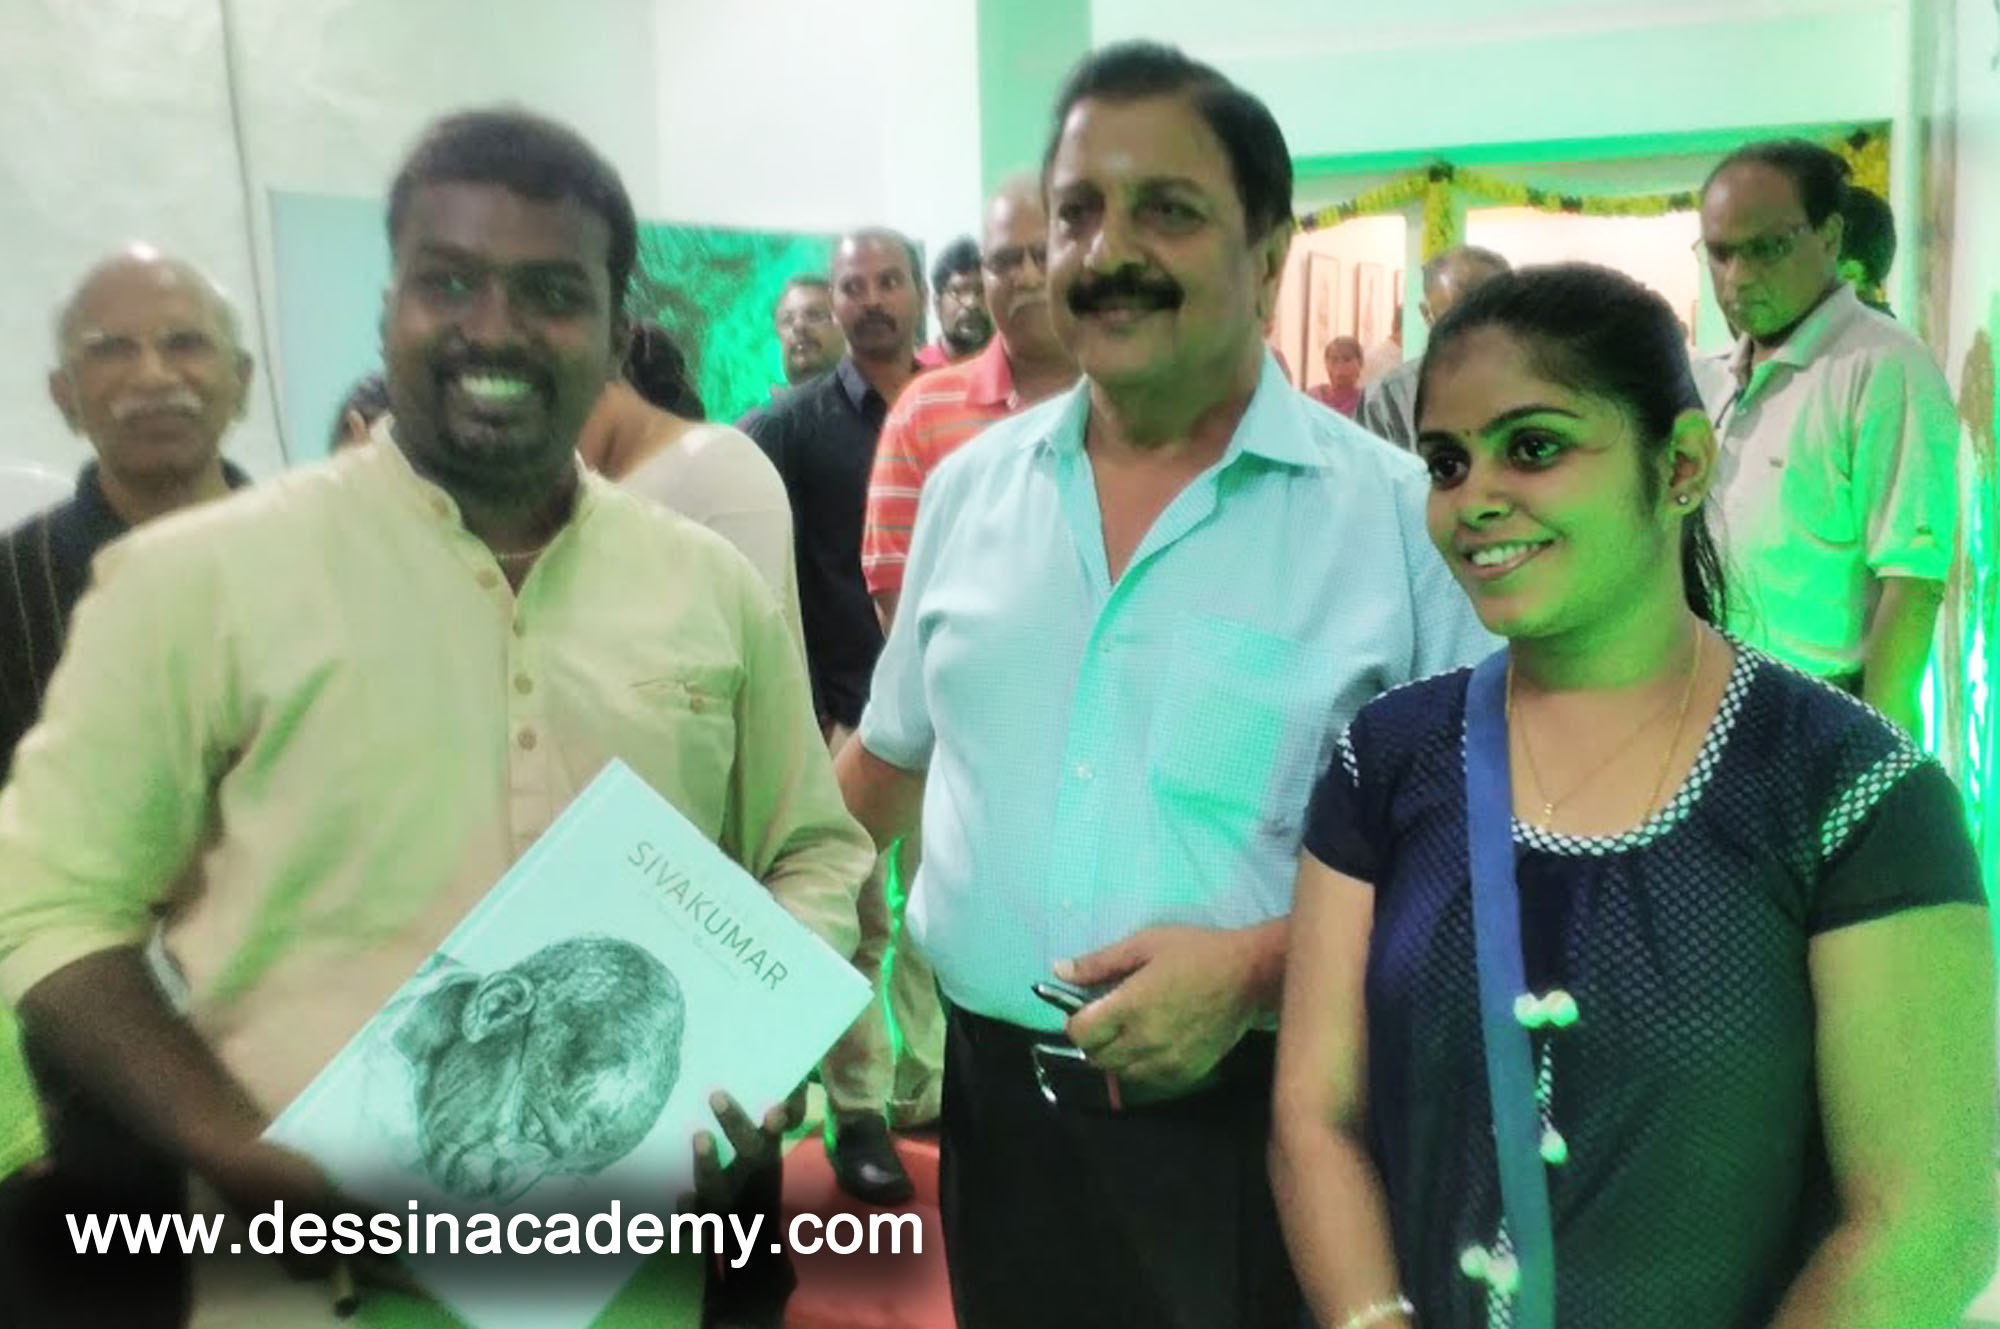 Dessin School of Arts Event Gallery 4, Drawing Institute in ChennaiDessin School of Arts